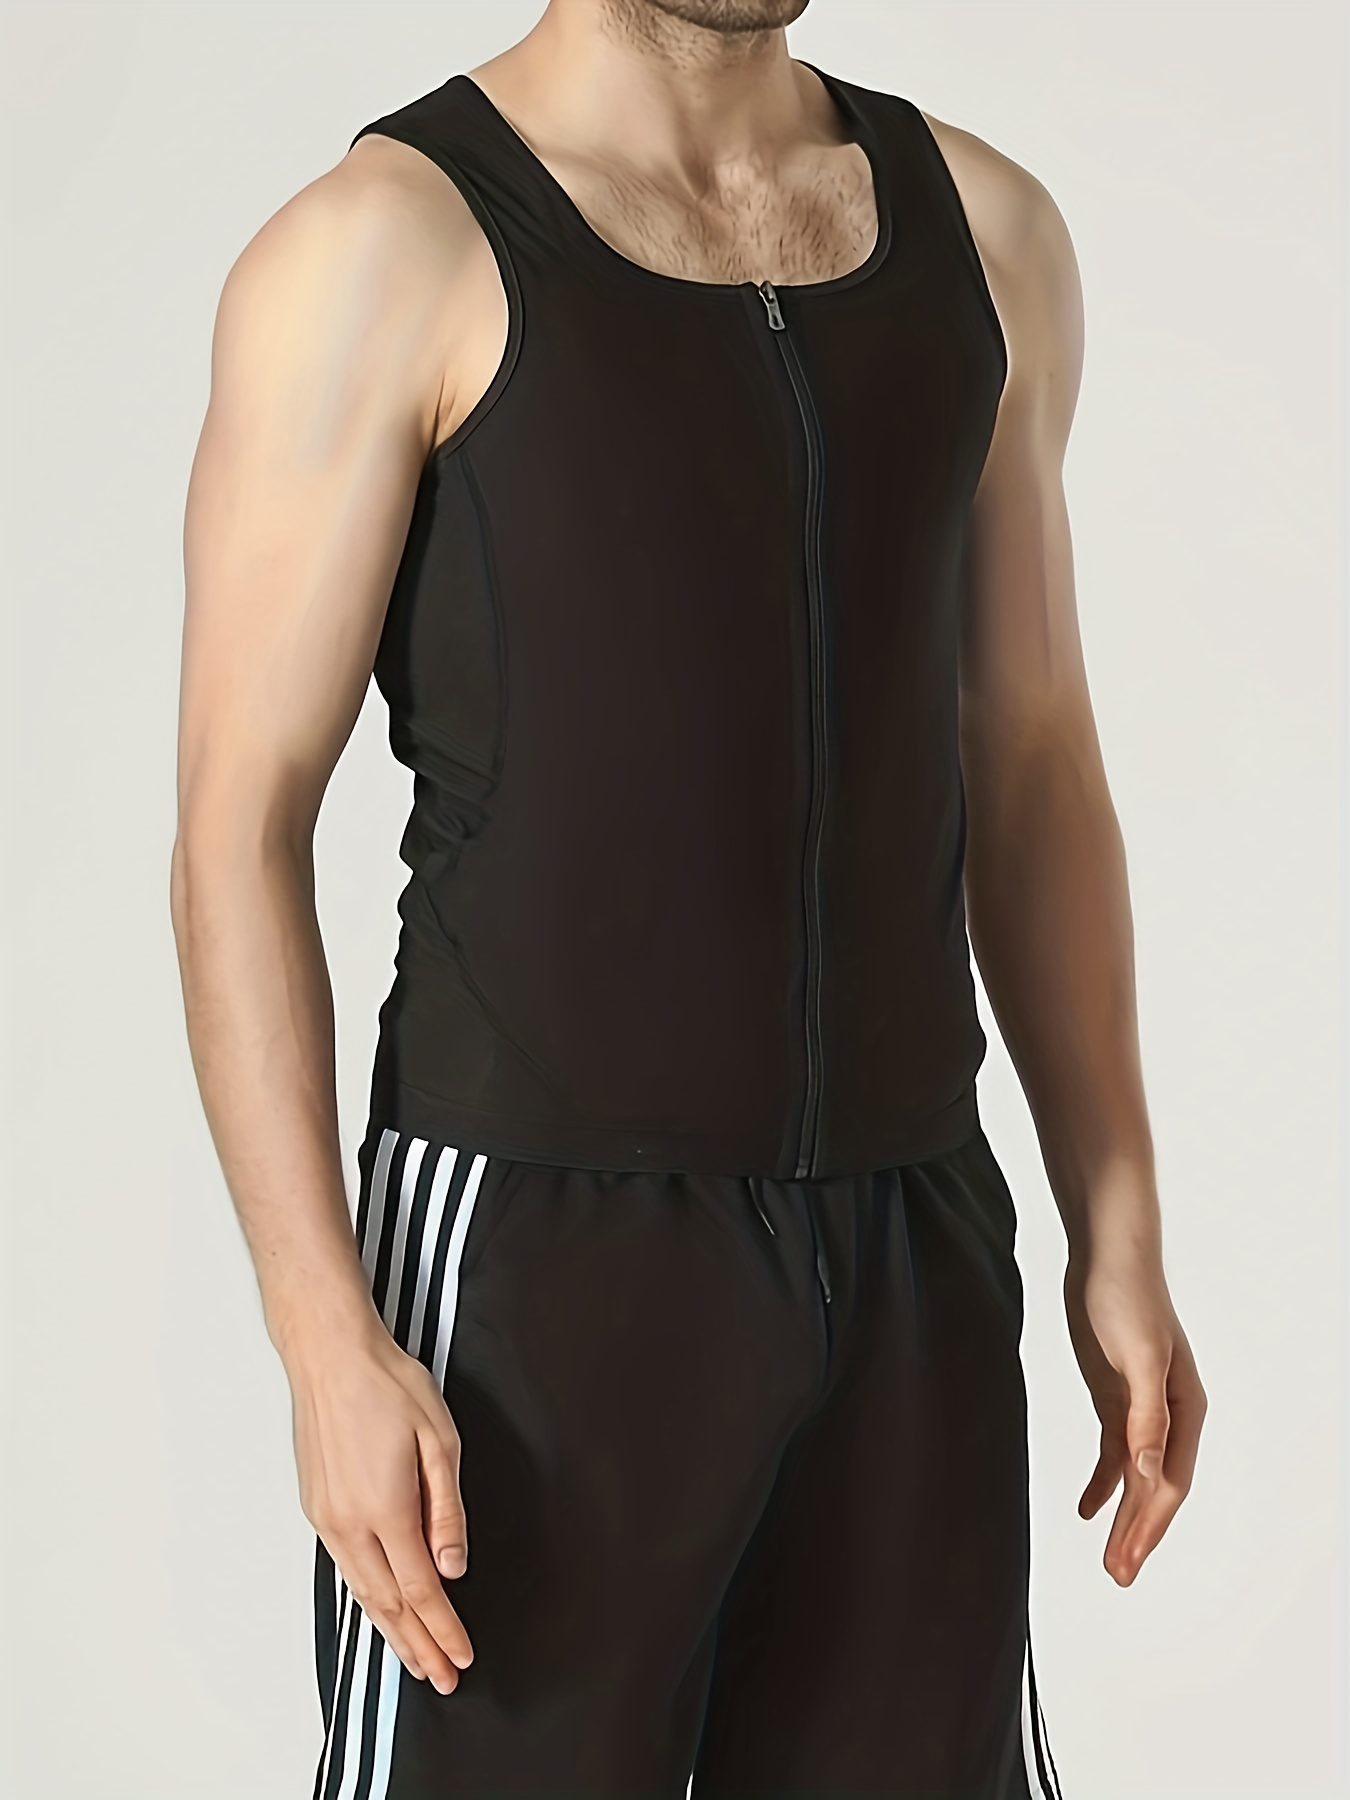 Men's Outdoor Sports Tight-fitting Sweat Sauna Vest, Waist Trainer Body  Shaper Back Support Vest Suitable For Exercise Fitness Gym